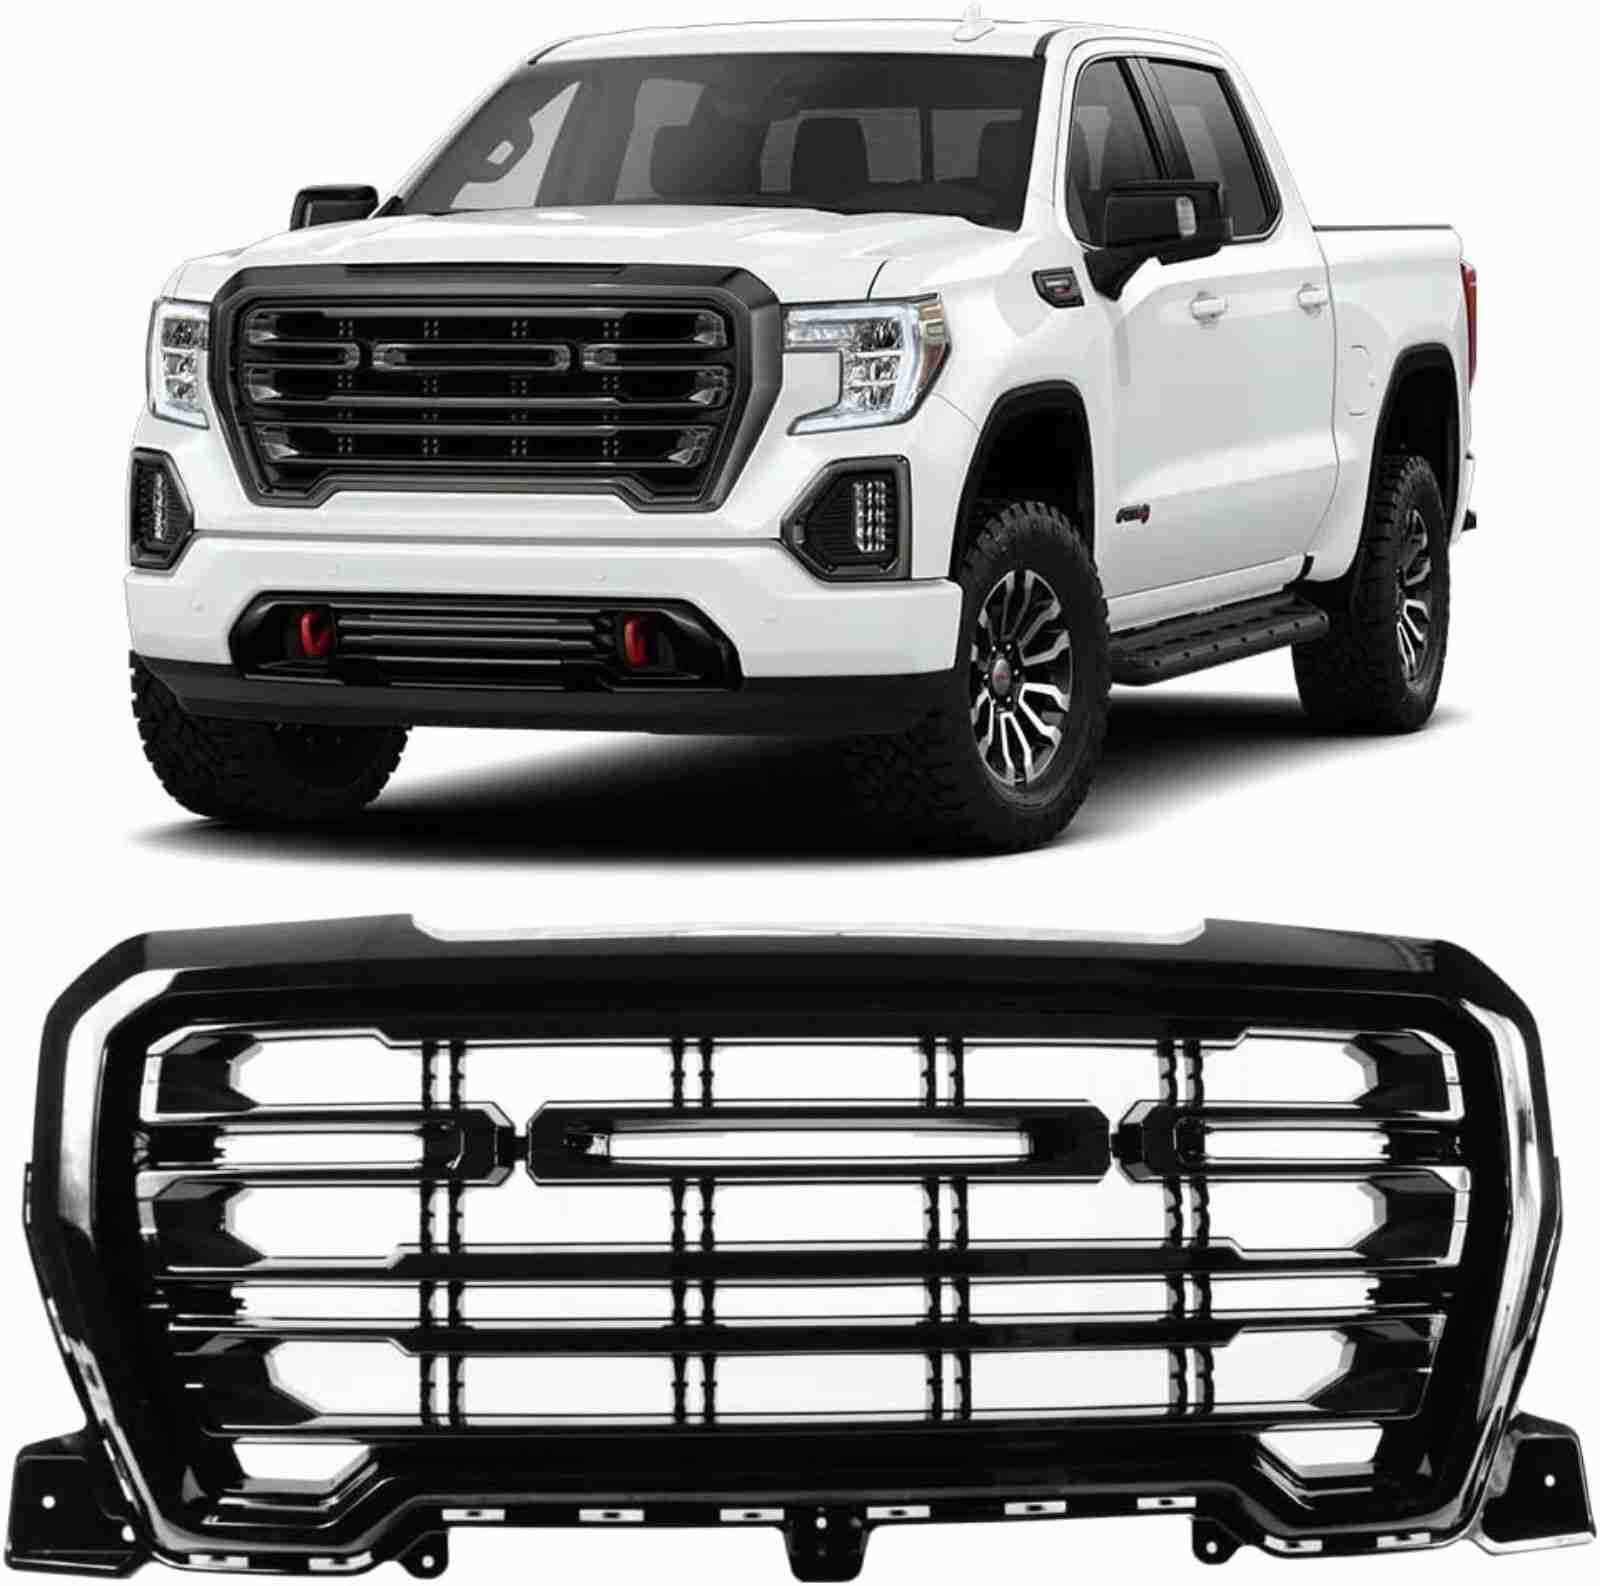 VICTOCAR Gloss Black Factory Front Upper Grille For 2019-2021 GMC Sierra 1500